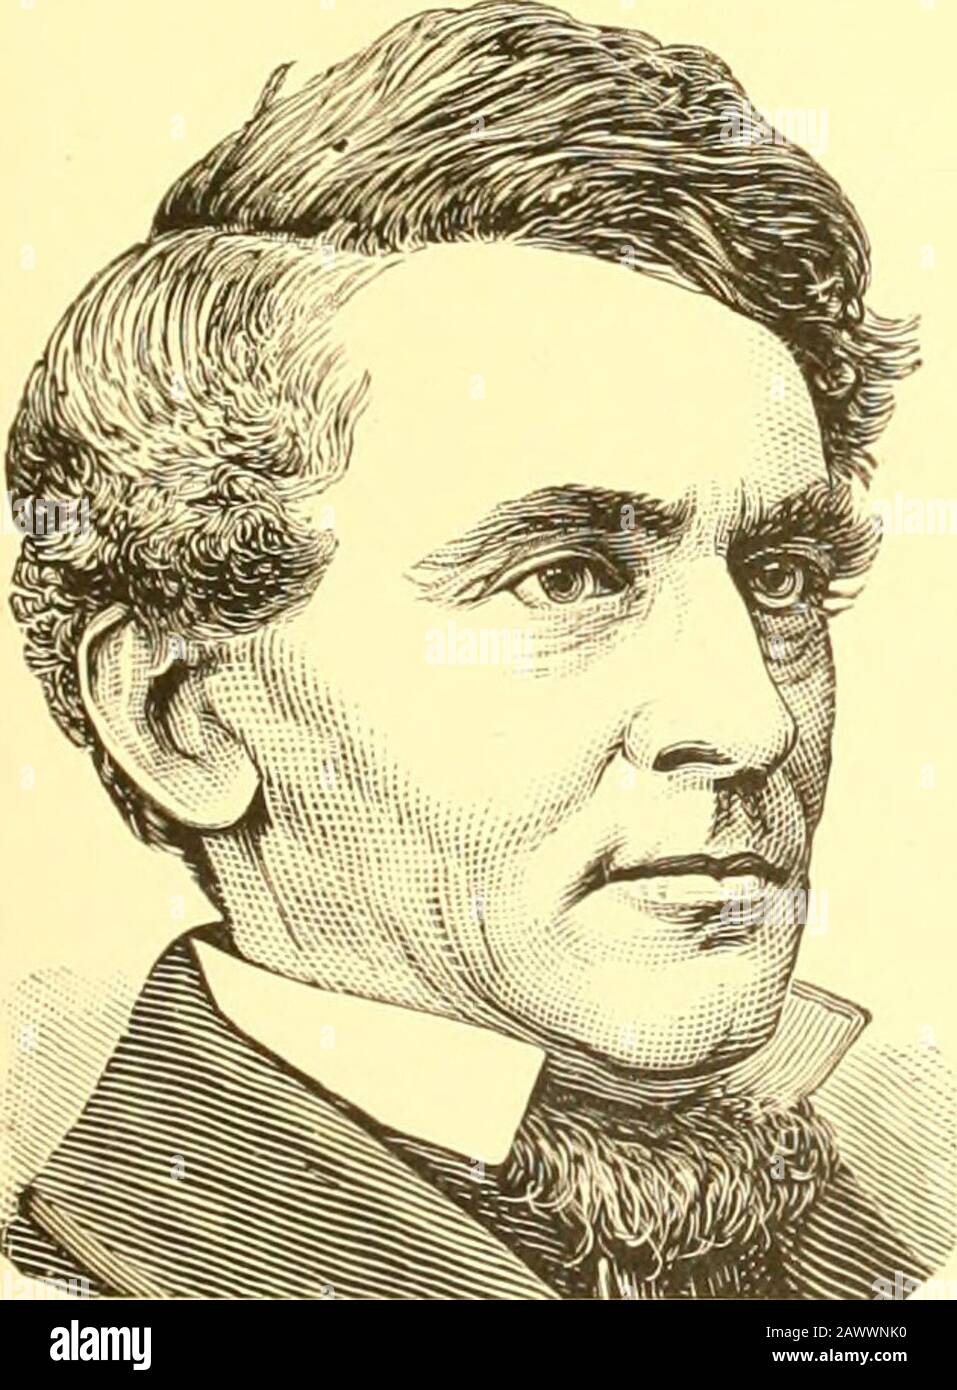 The story of a great nationOr, Our country's achievements, military, naval, political, and civil . SCHUYLER COLFAX.Born in New York Cily. :l;in li x.3. IS:^^. CommonF&lt;hooi f(lIIcation. Kemovcil in Iinliiinii, IS^itl. Delegalt*to and Sfcretary of National Wliii, (.onventionp, 1848. b2.IMembtT of Congees from 18.54 to 1868. when he wasfleeted Vice-President of the IT. S., on the ticket with(ien. firant. Speaker of the Houae during three Cou-greeees. Died, Jan. 13. 1885. MRS. U. S. GRANT.Misf^ Julia Dent was bom in IH^C. After graduatingin 184^J, Lieut. Grant formed heracciuuintancc, an(i on Stock Photo